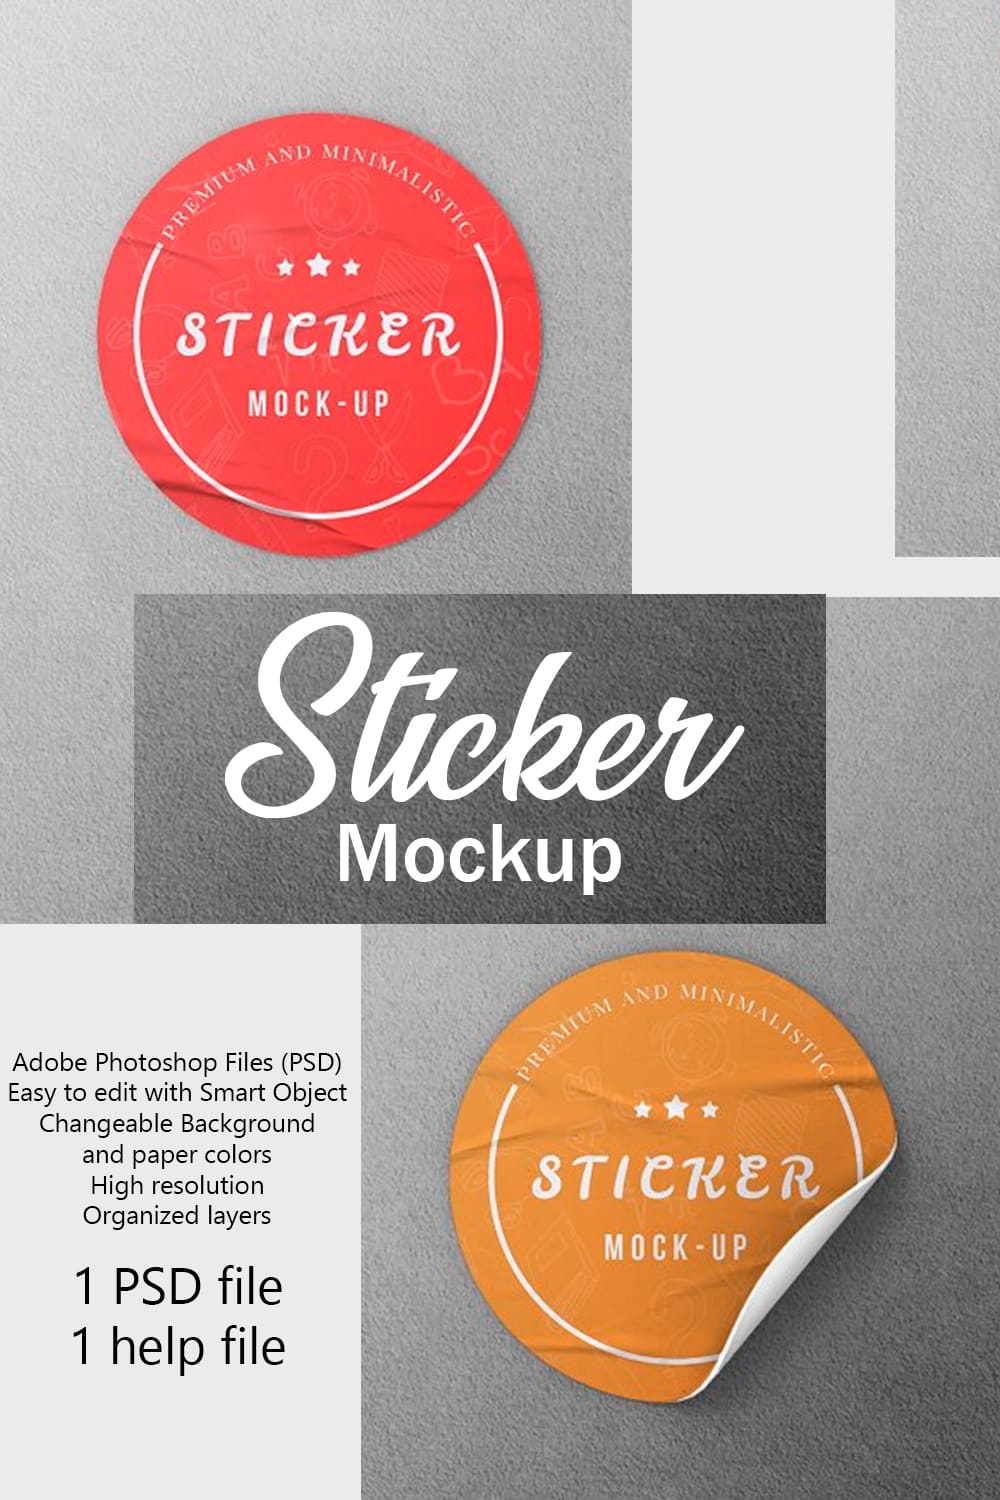 Gorgeous red and orange stickers images.